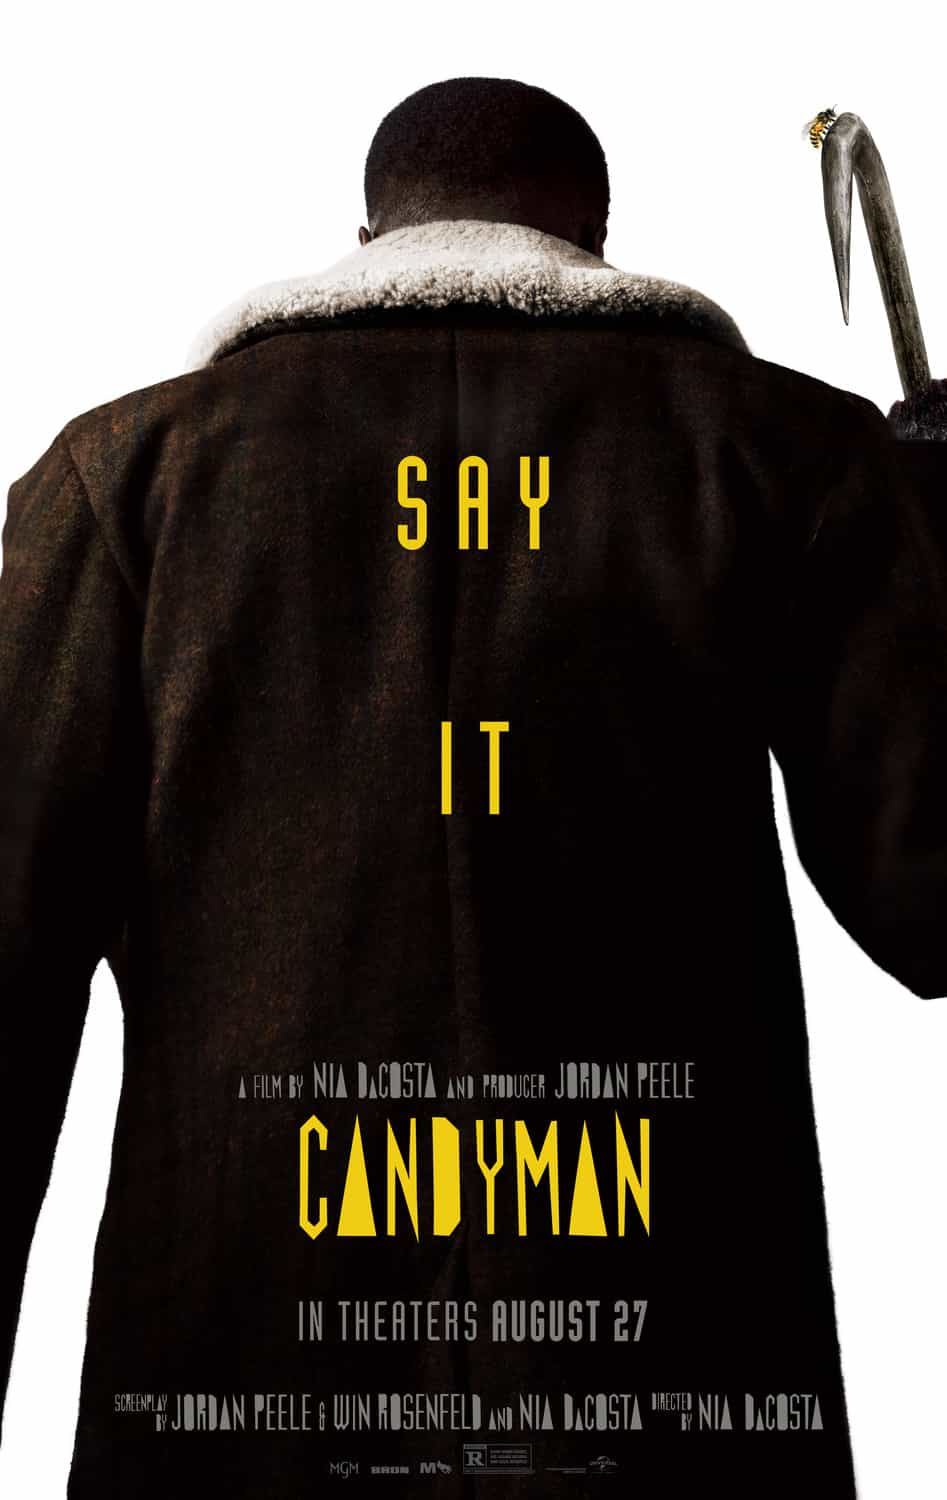 New movie preview UK releases over weekend Friday 27th August 2021 - Candyman, Our Ladies, Demonic, The Nest and The Last Bus